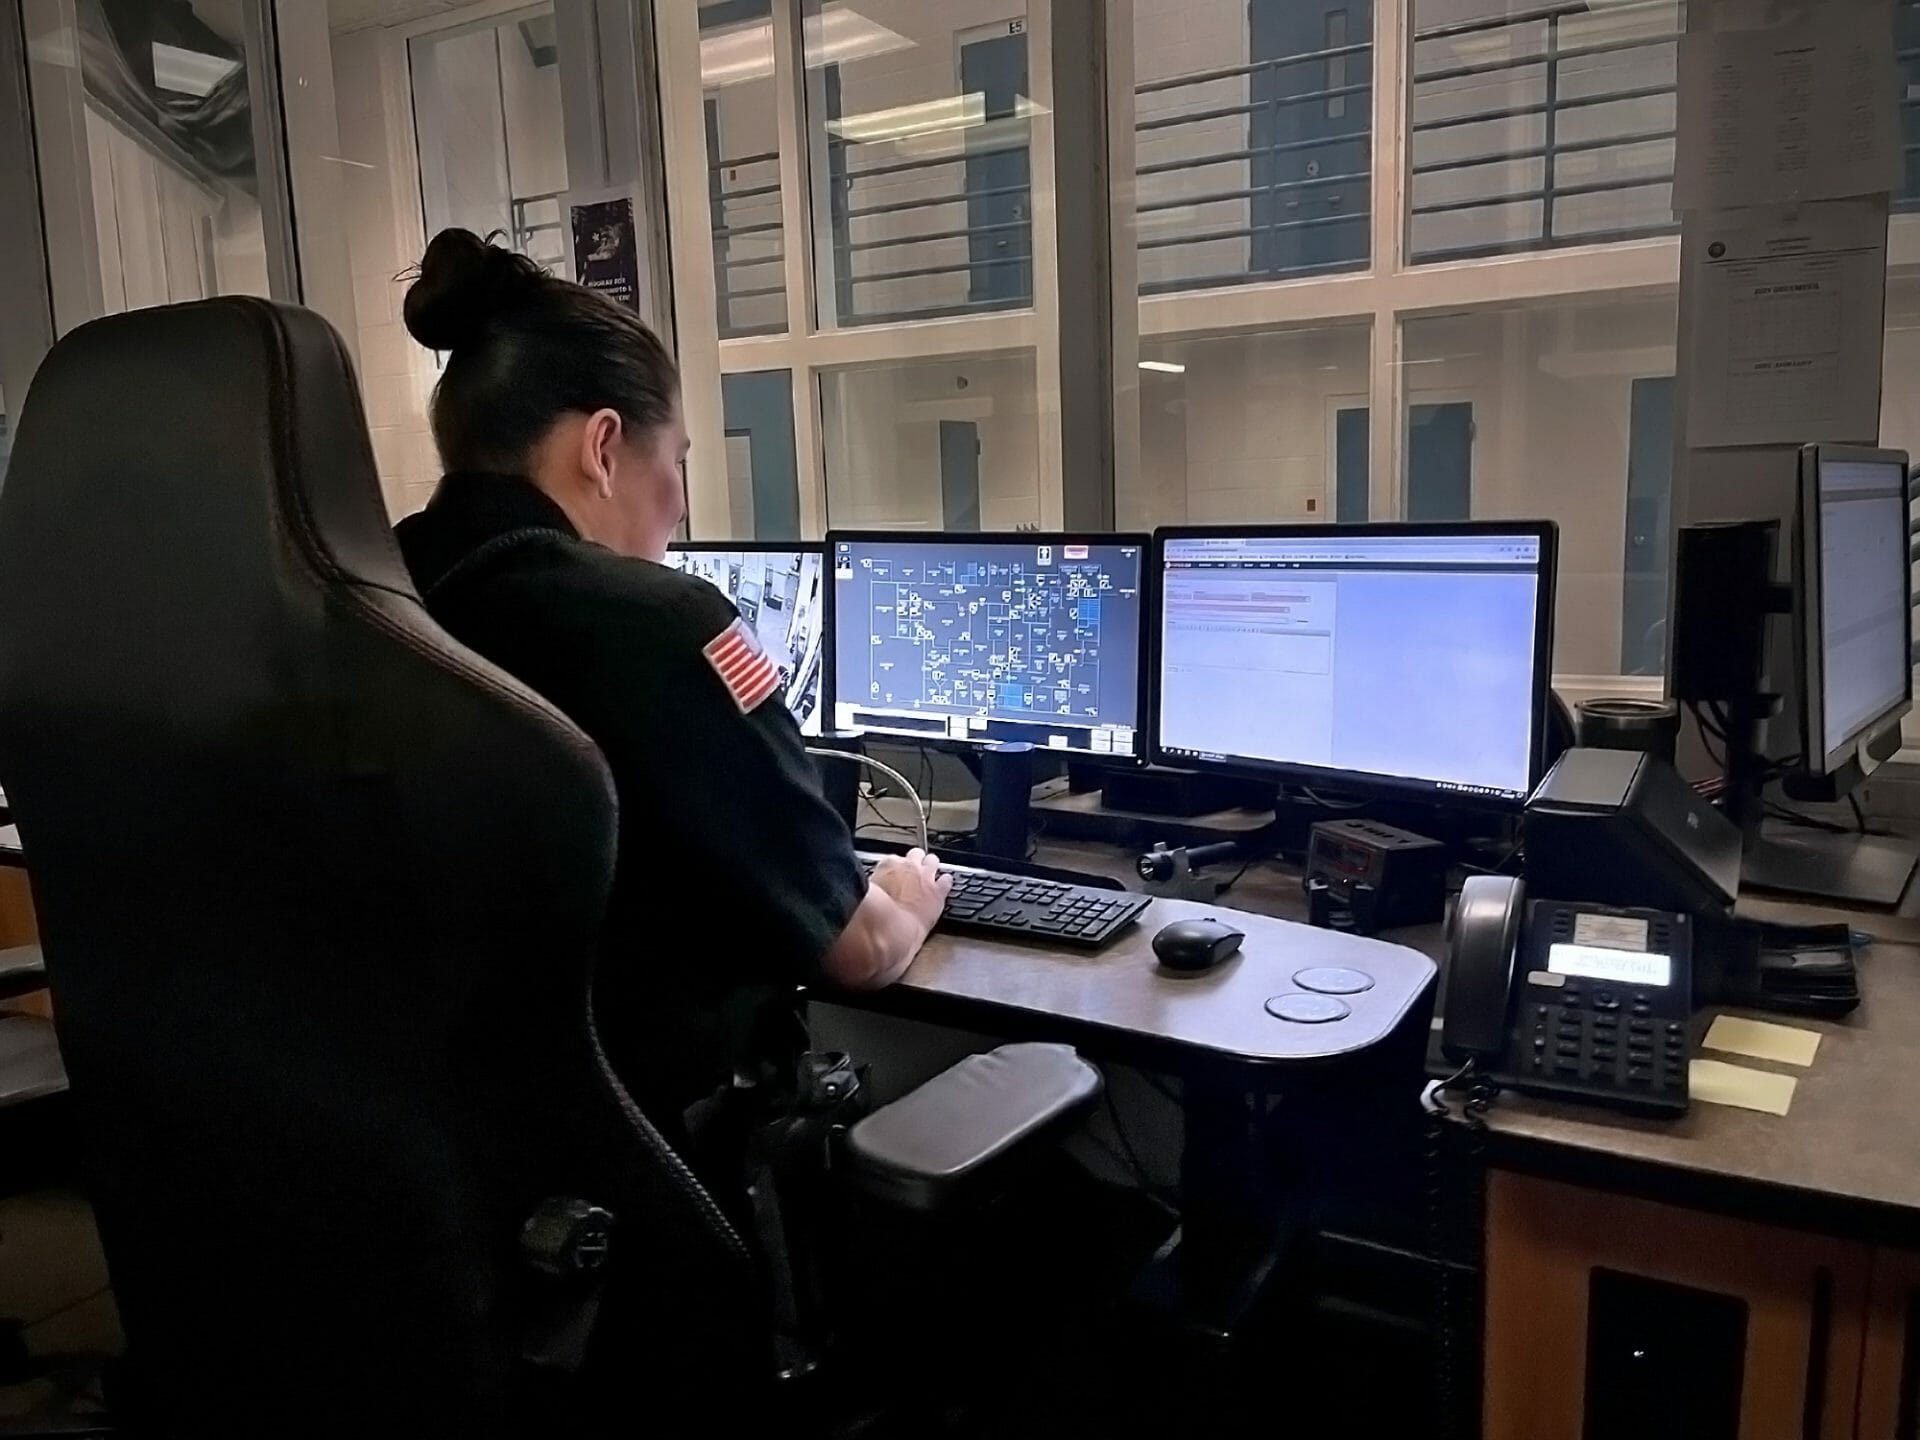 Corrections Officer using eForce software systems